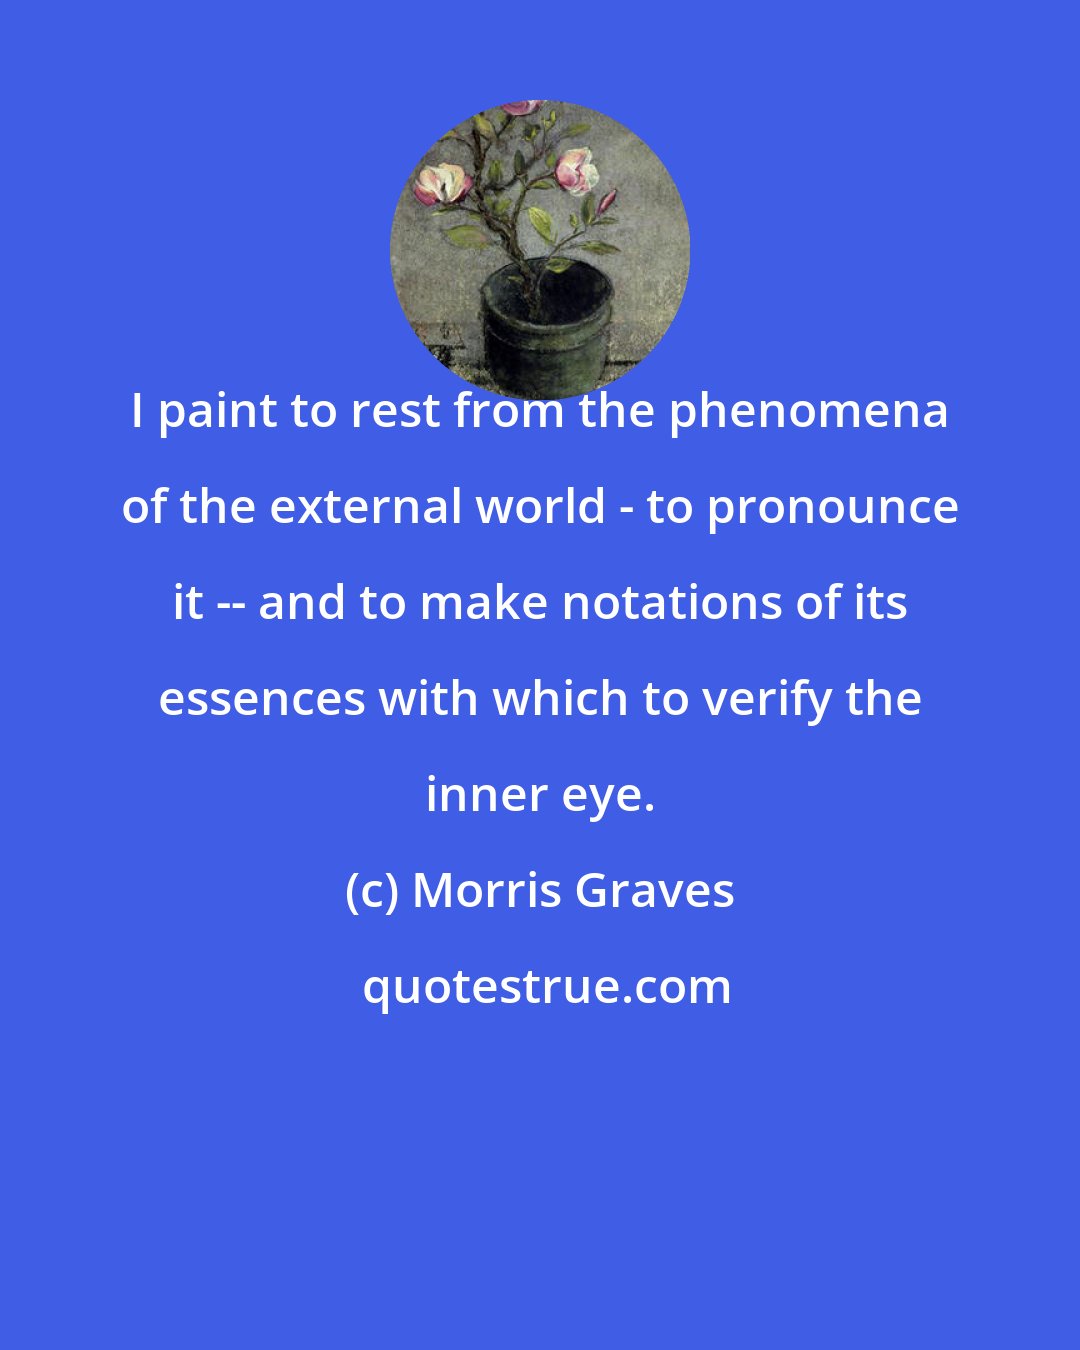 Morris Graves: I paint to rest from the phenomena of the external world - to pronounce it -- and to make notations of its essences with which to verify the inner eye.